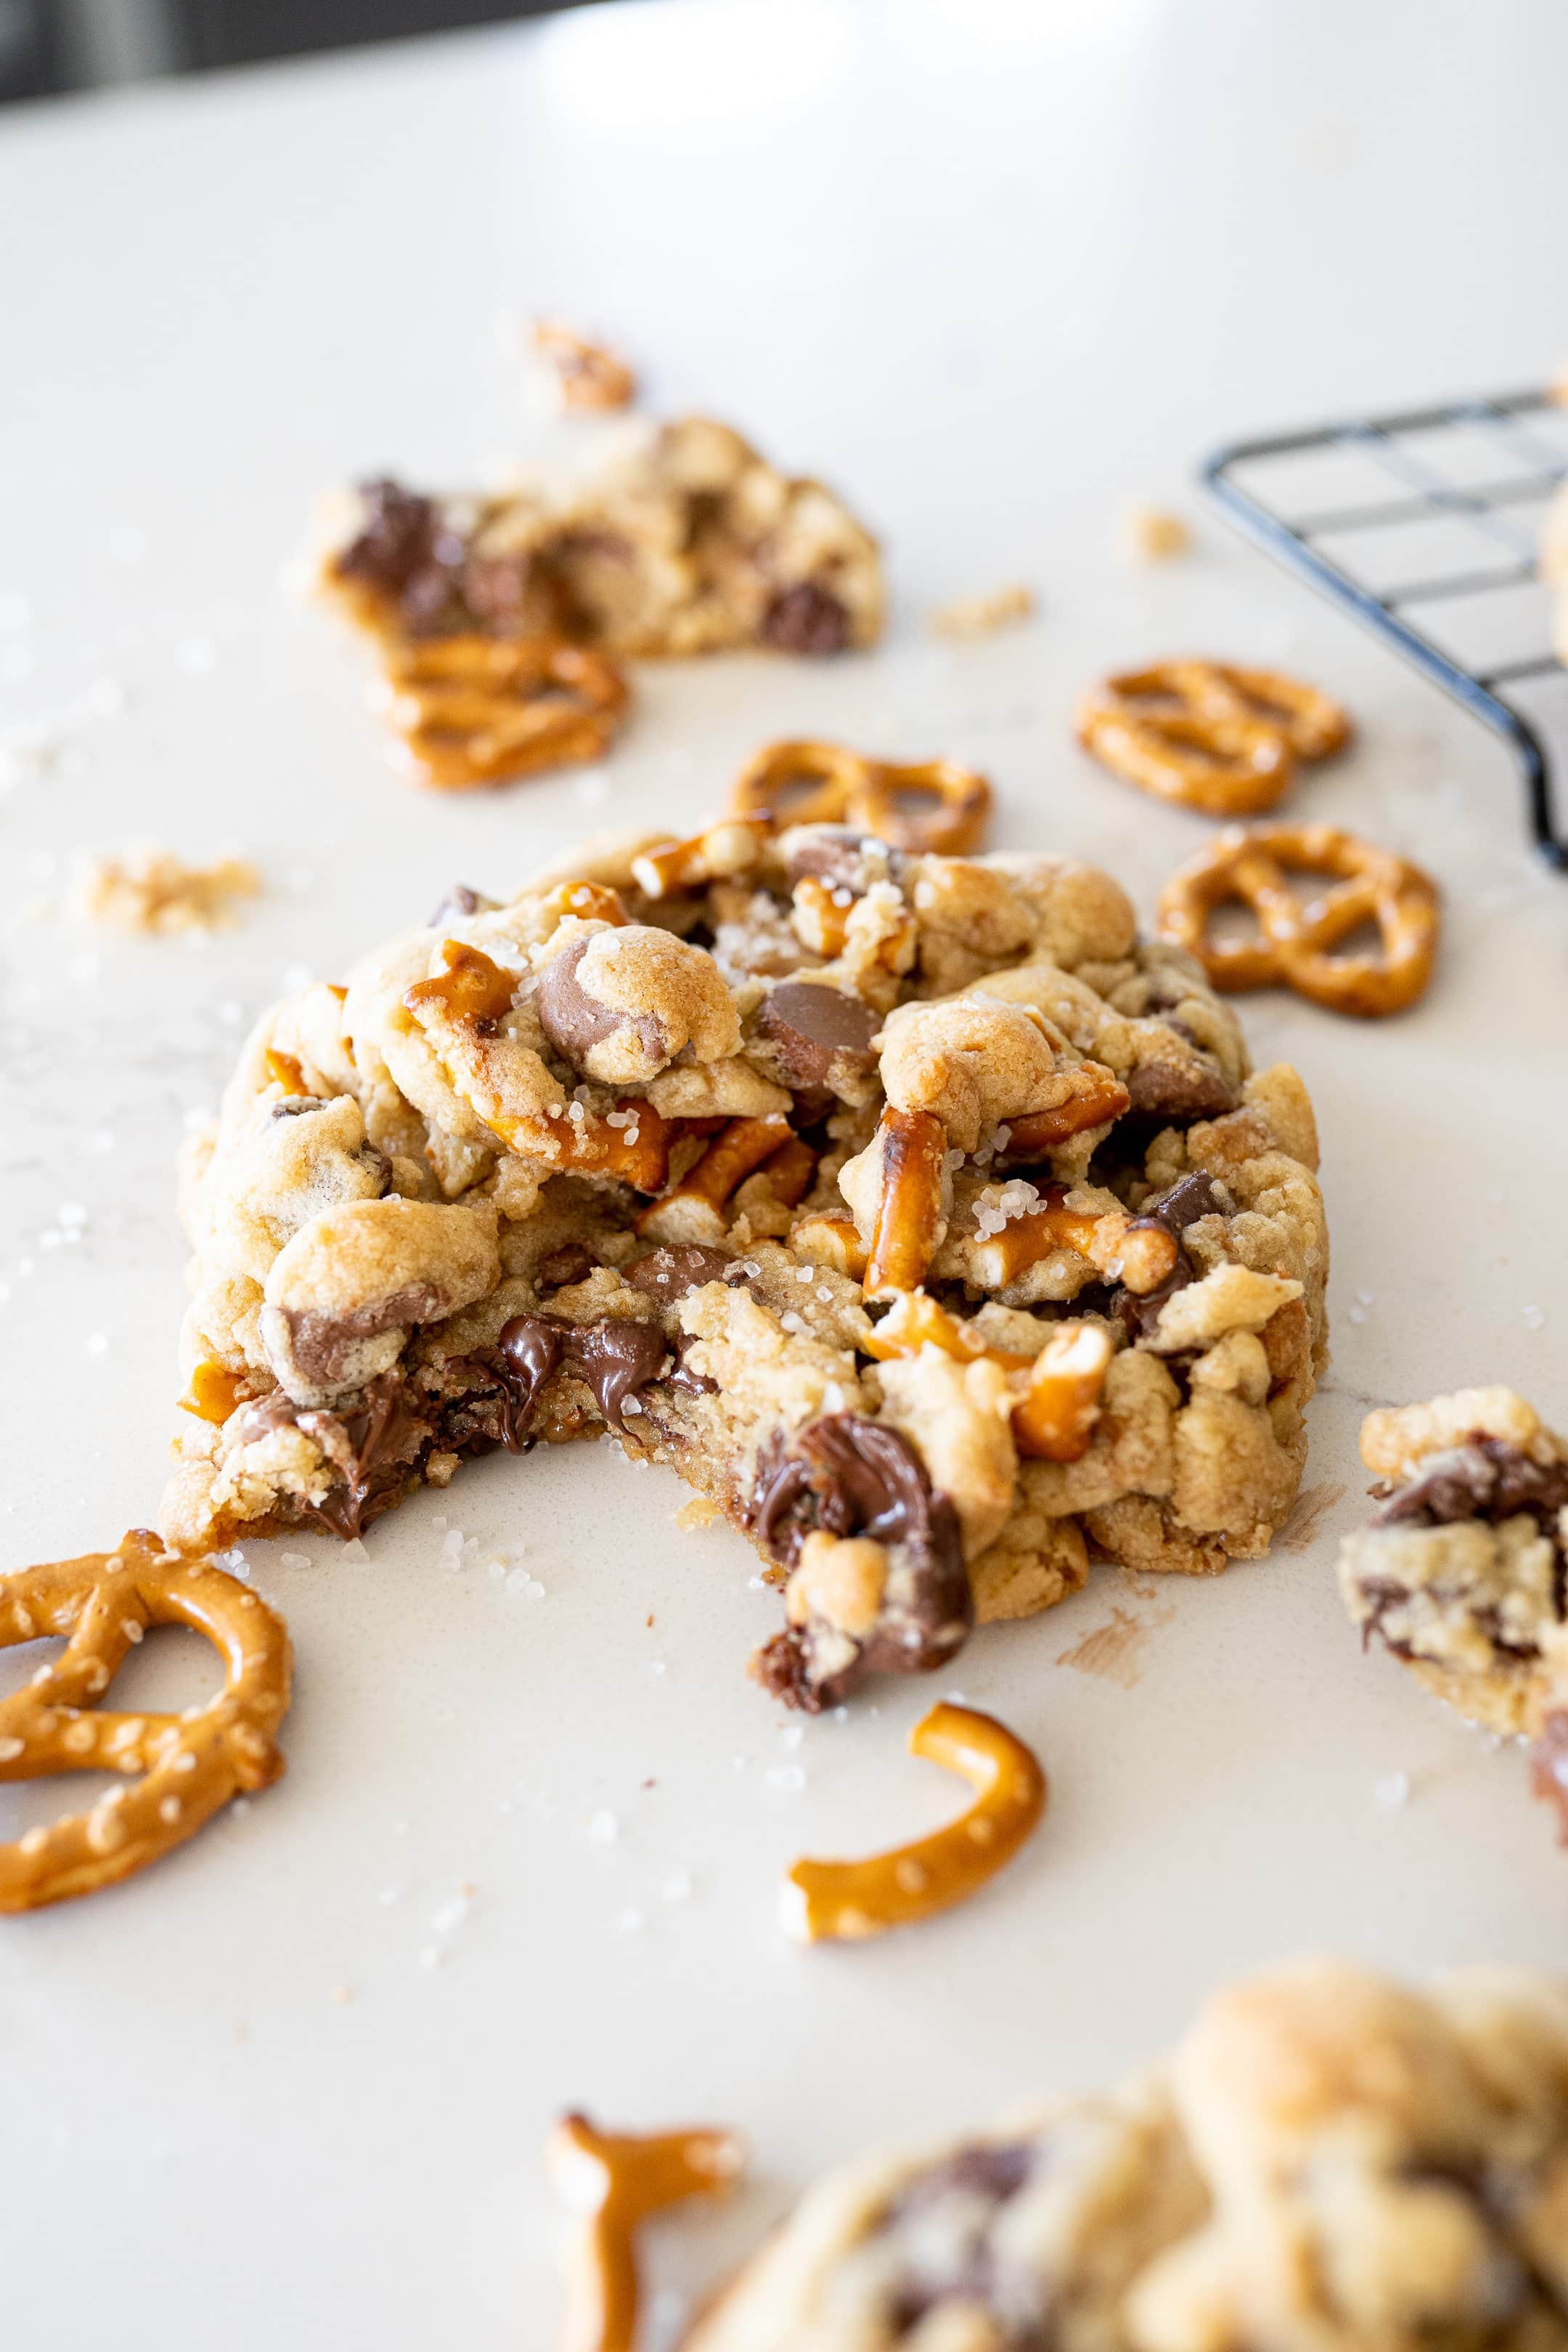 a cookie with melted chocolate chips, pretzels and toffee with sea salt on top on the counter, with a bite taken out of it.